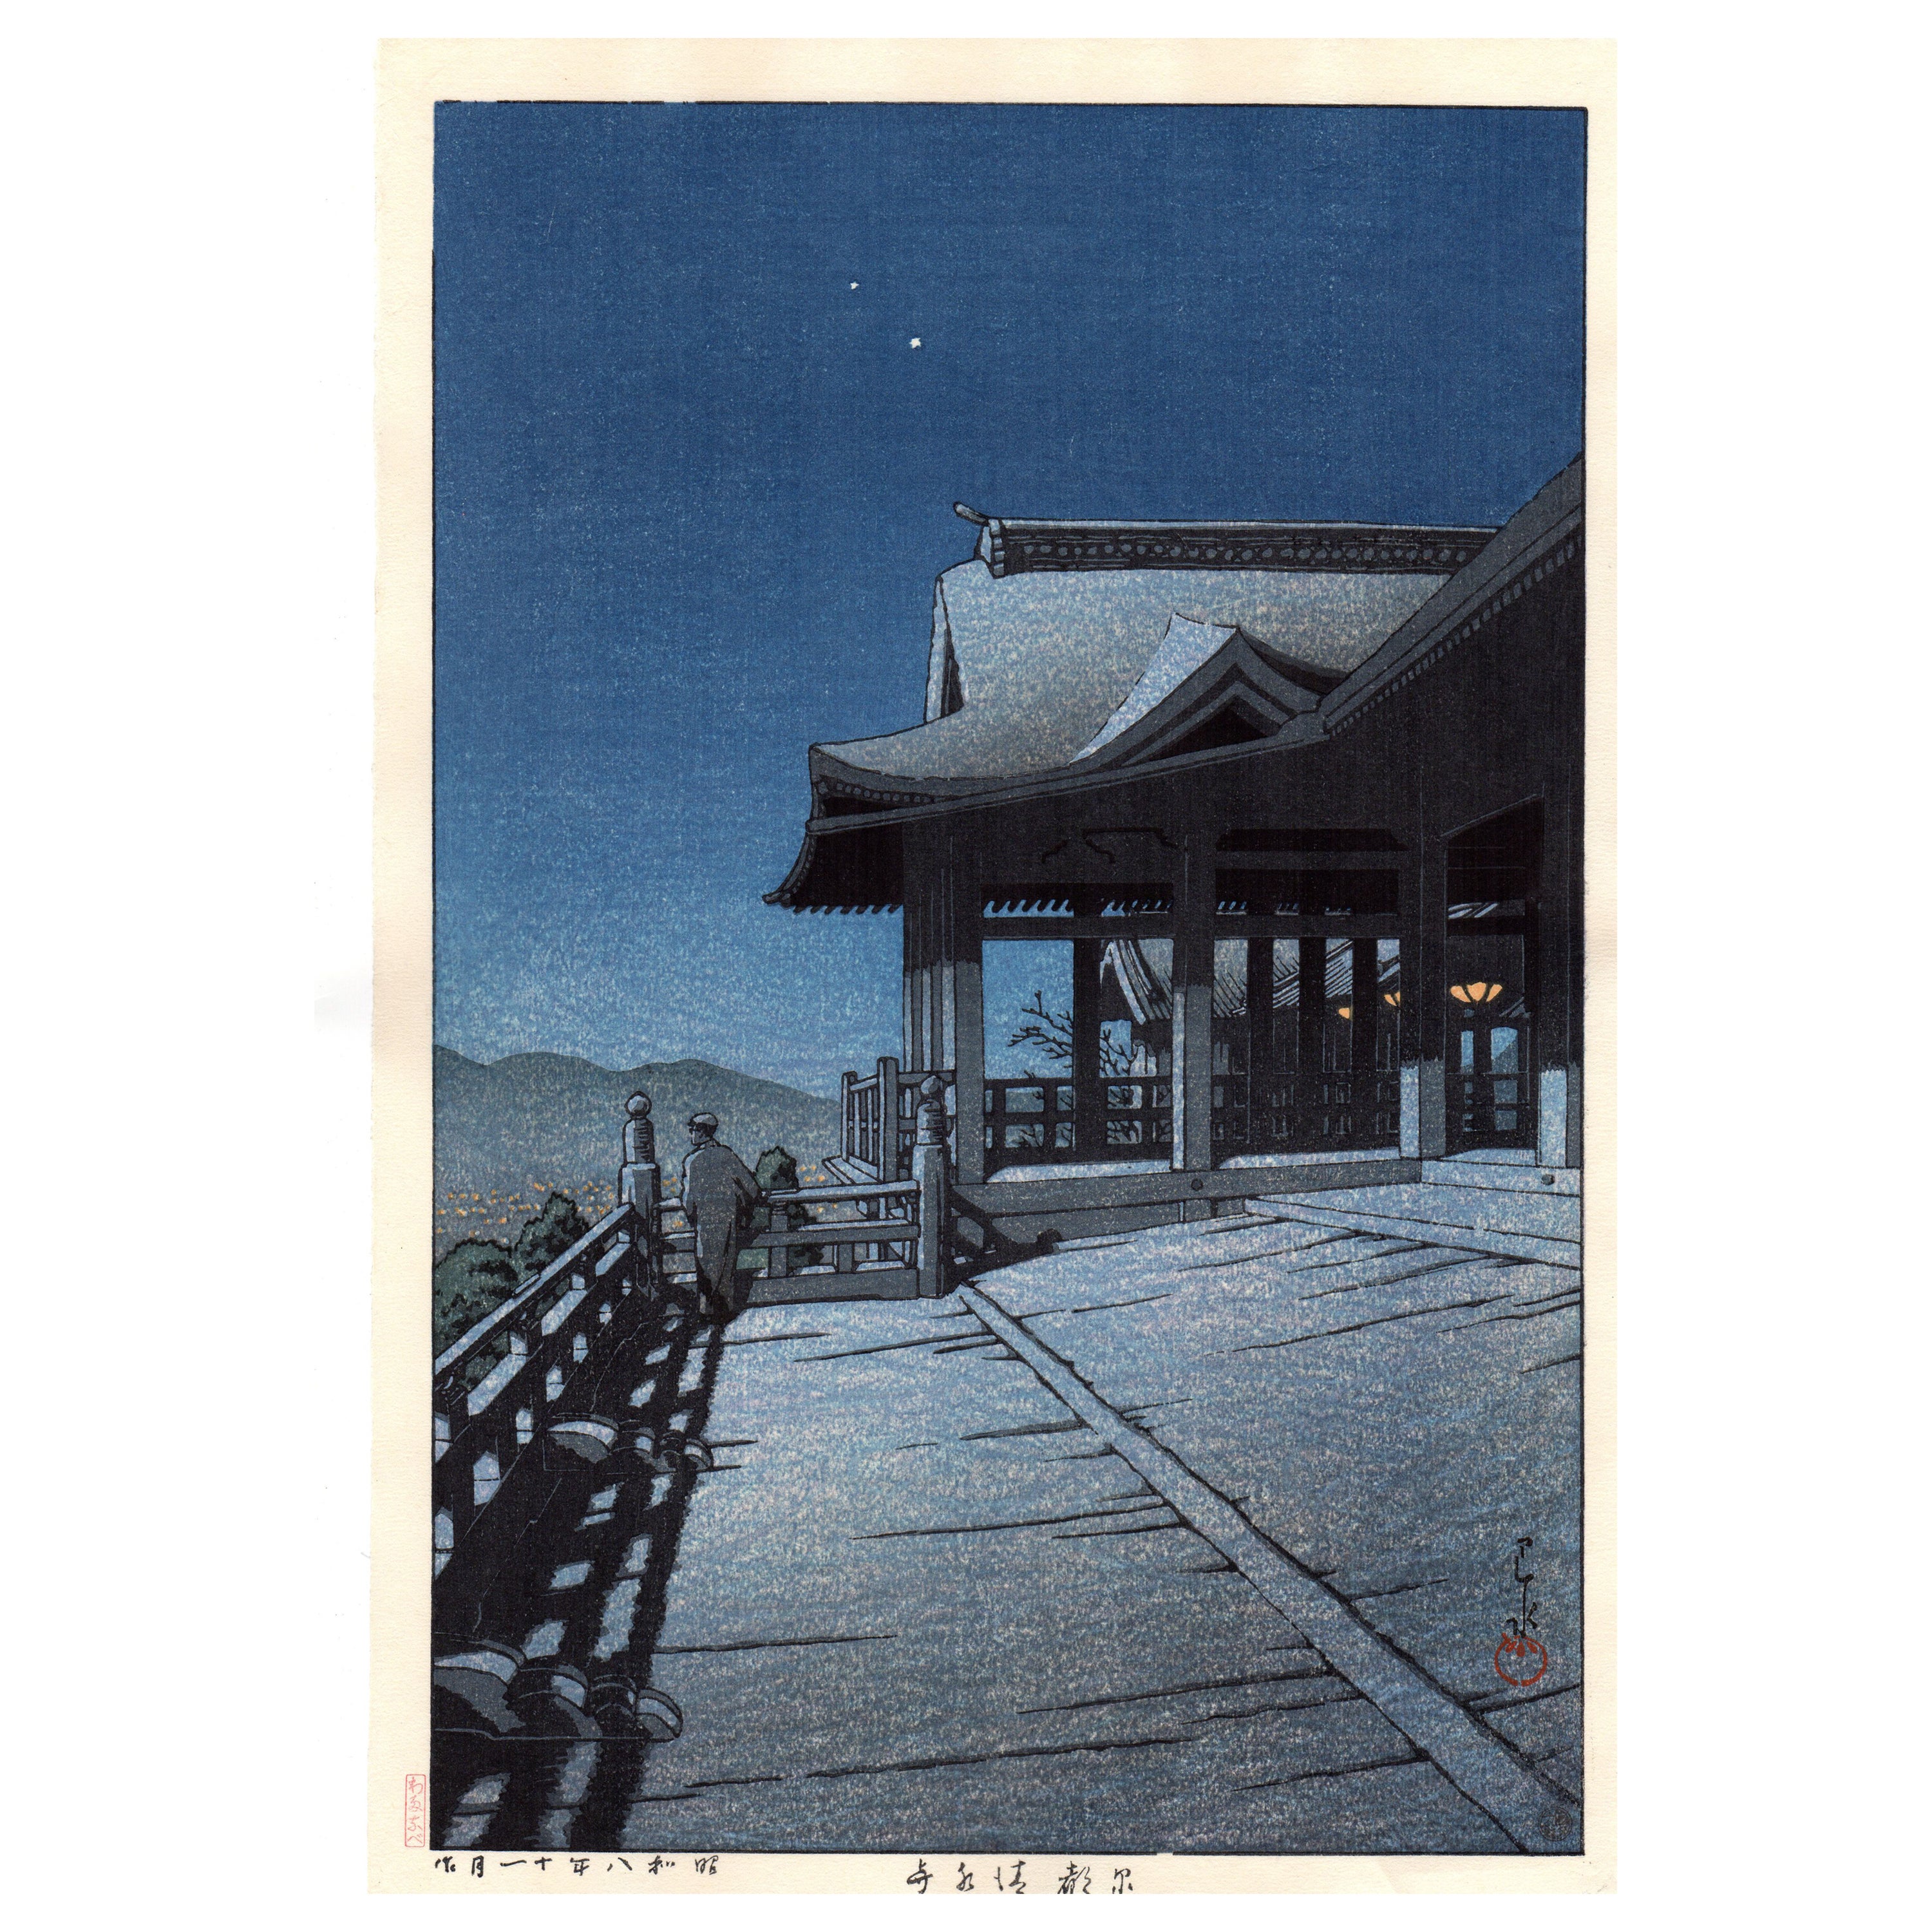 Authentic Japanese Woodblock Print by Kawase Hasui - Kiyomizu Temple in Kyoto For Sale